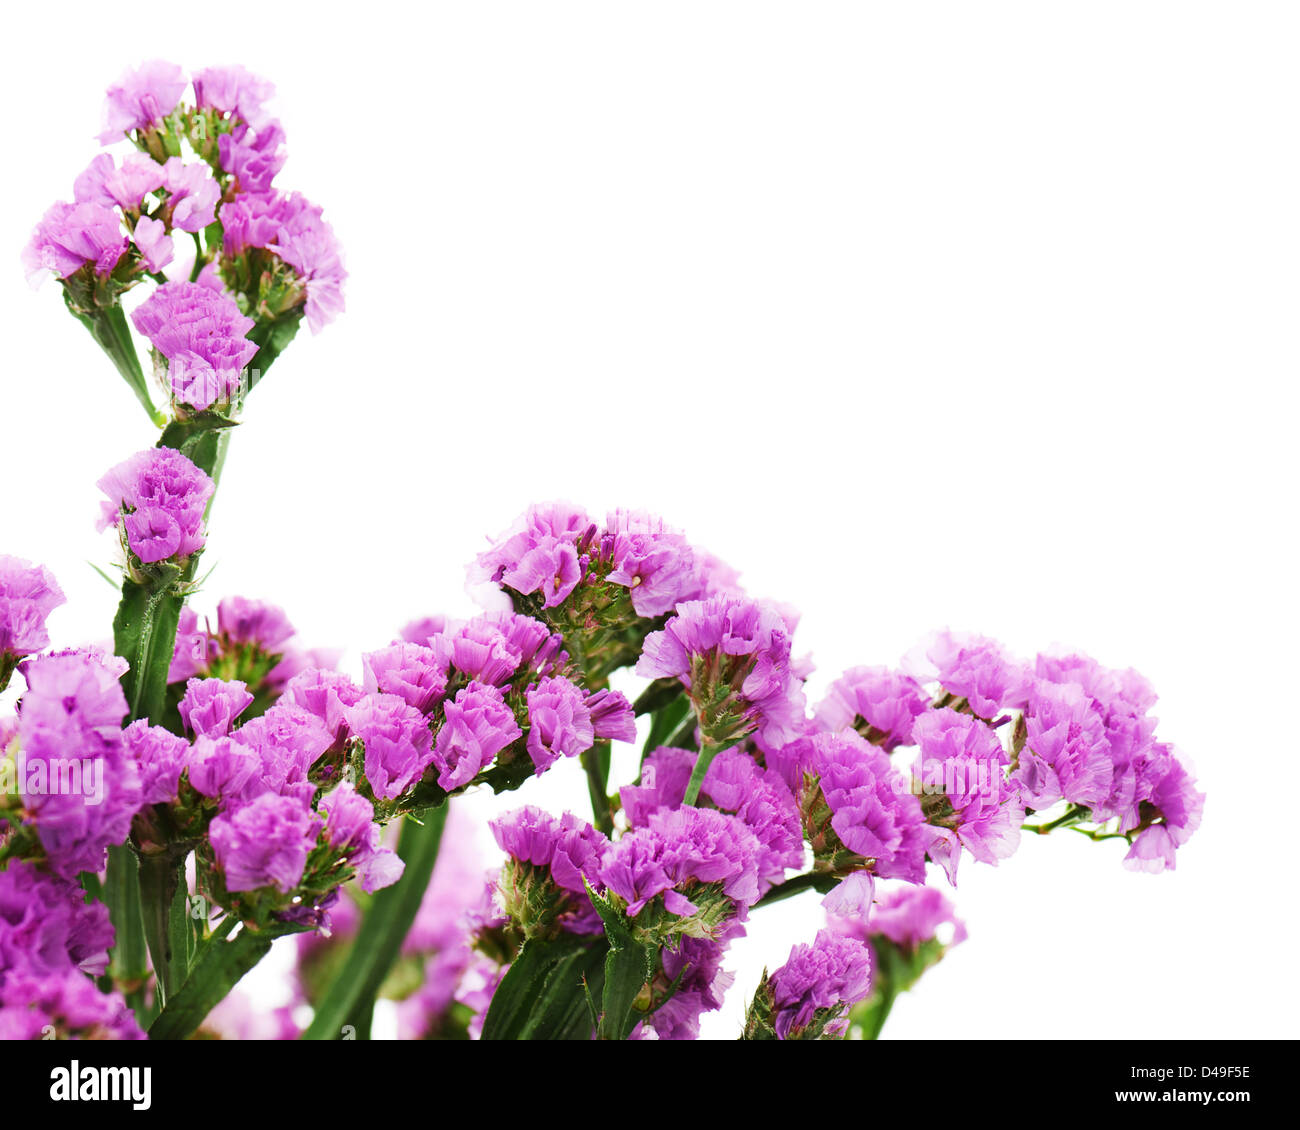 Bouquet from purple statice flowers arrangement isolated on white background. Selective focus. Stock Photo